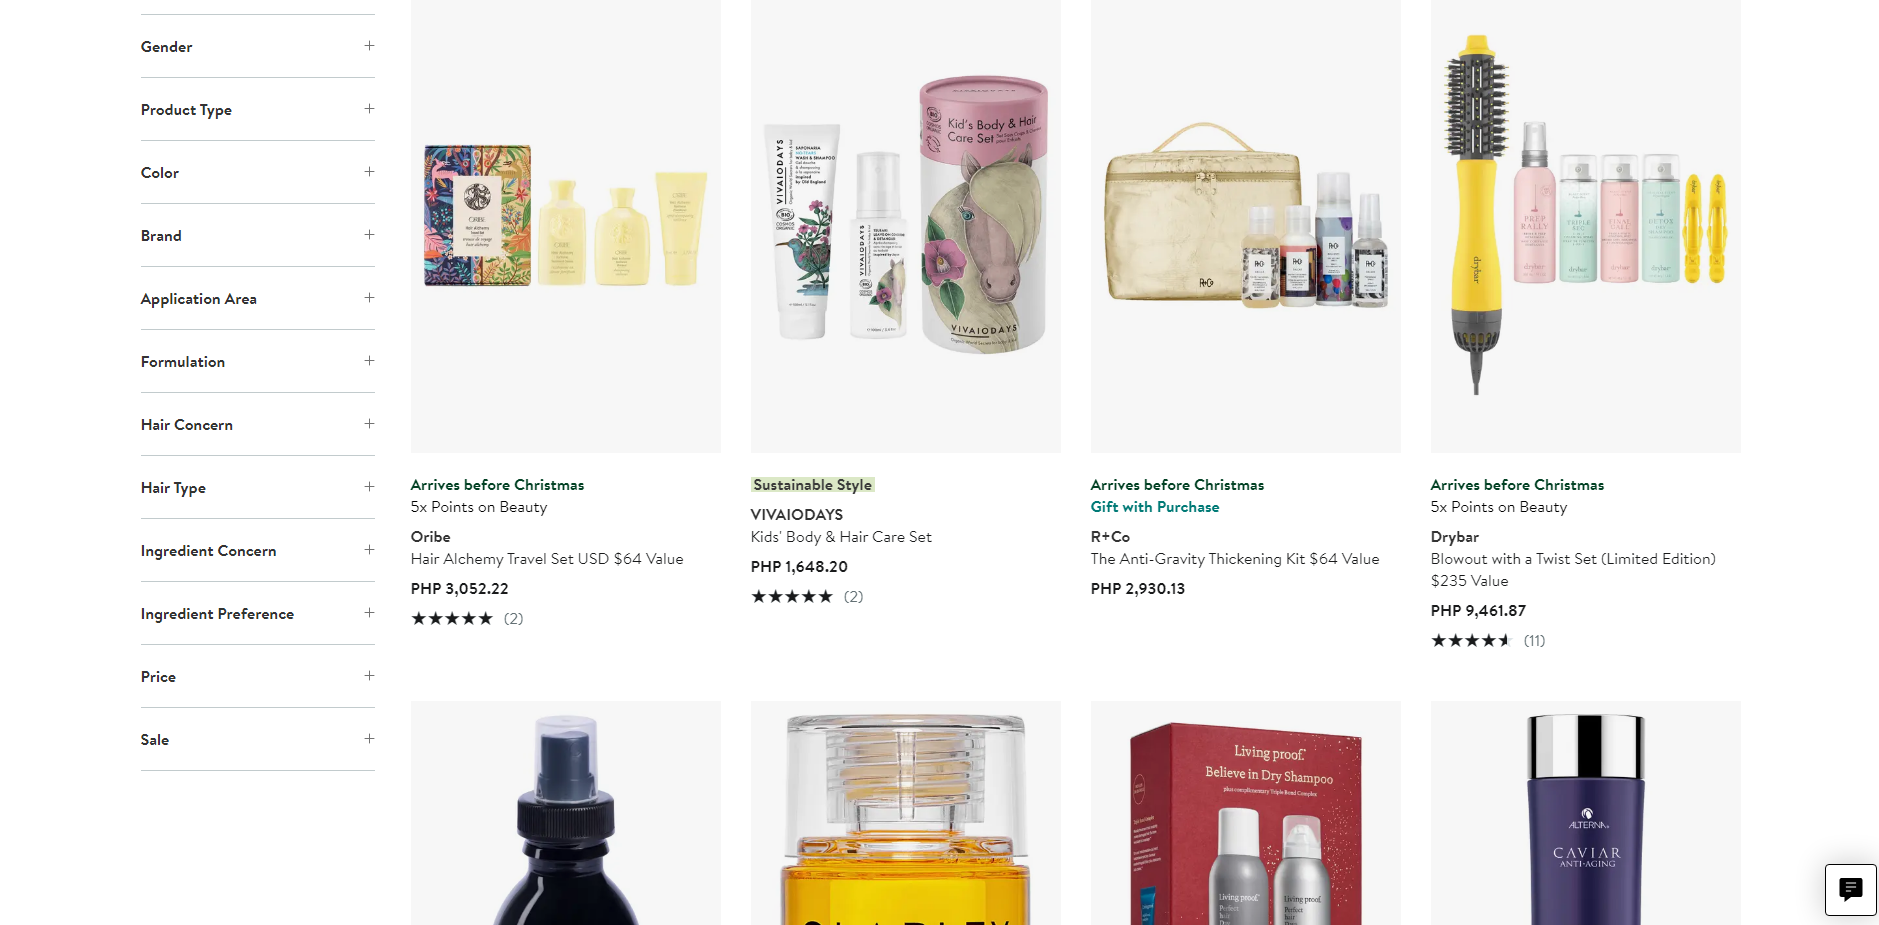 8 Best Hair Salon Dropshipping Suppliers 3: Nordstrom